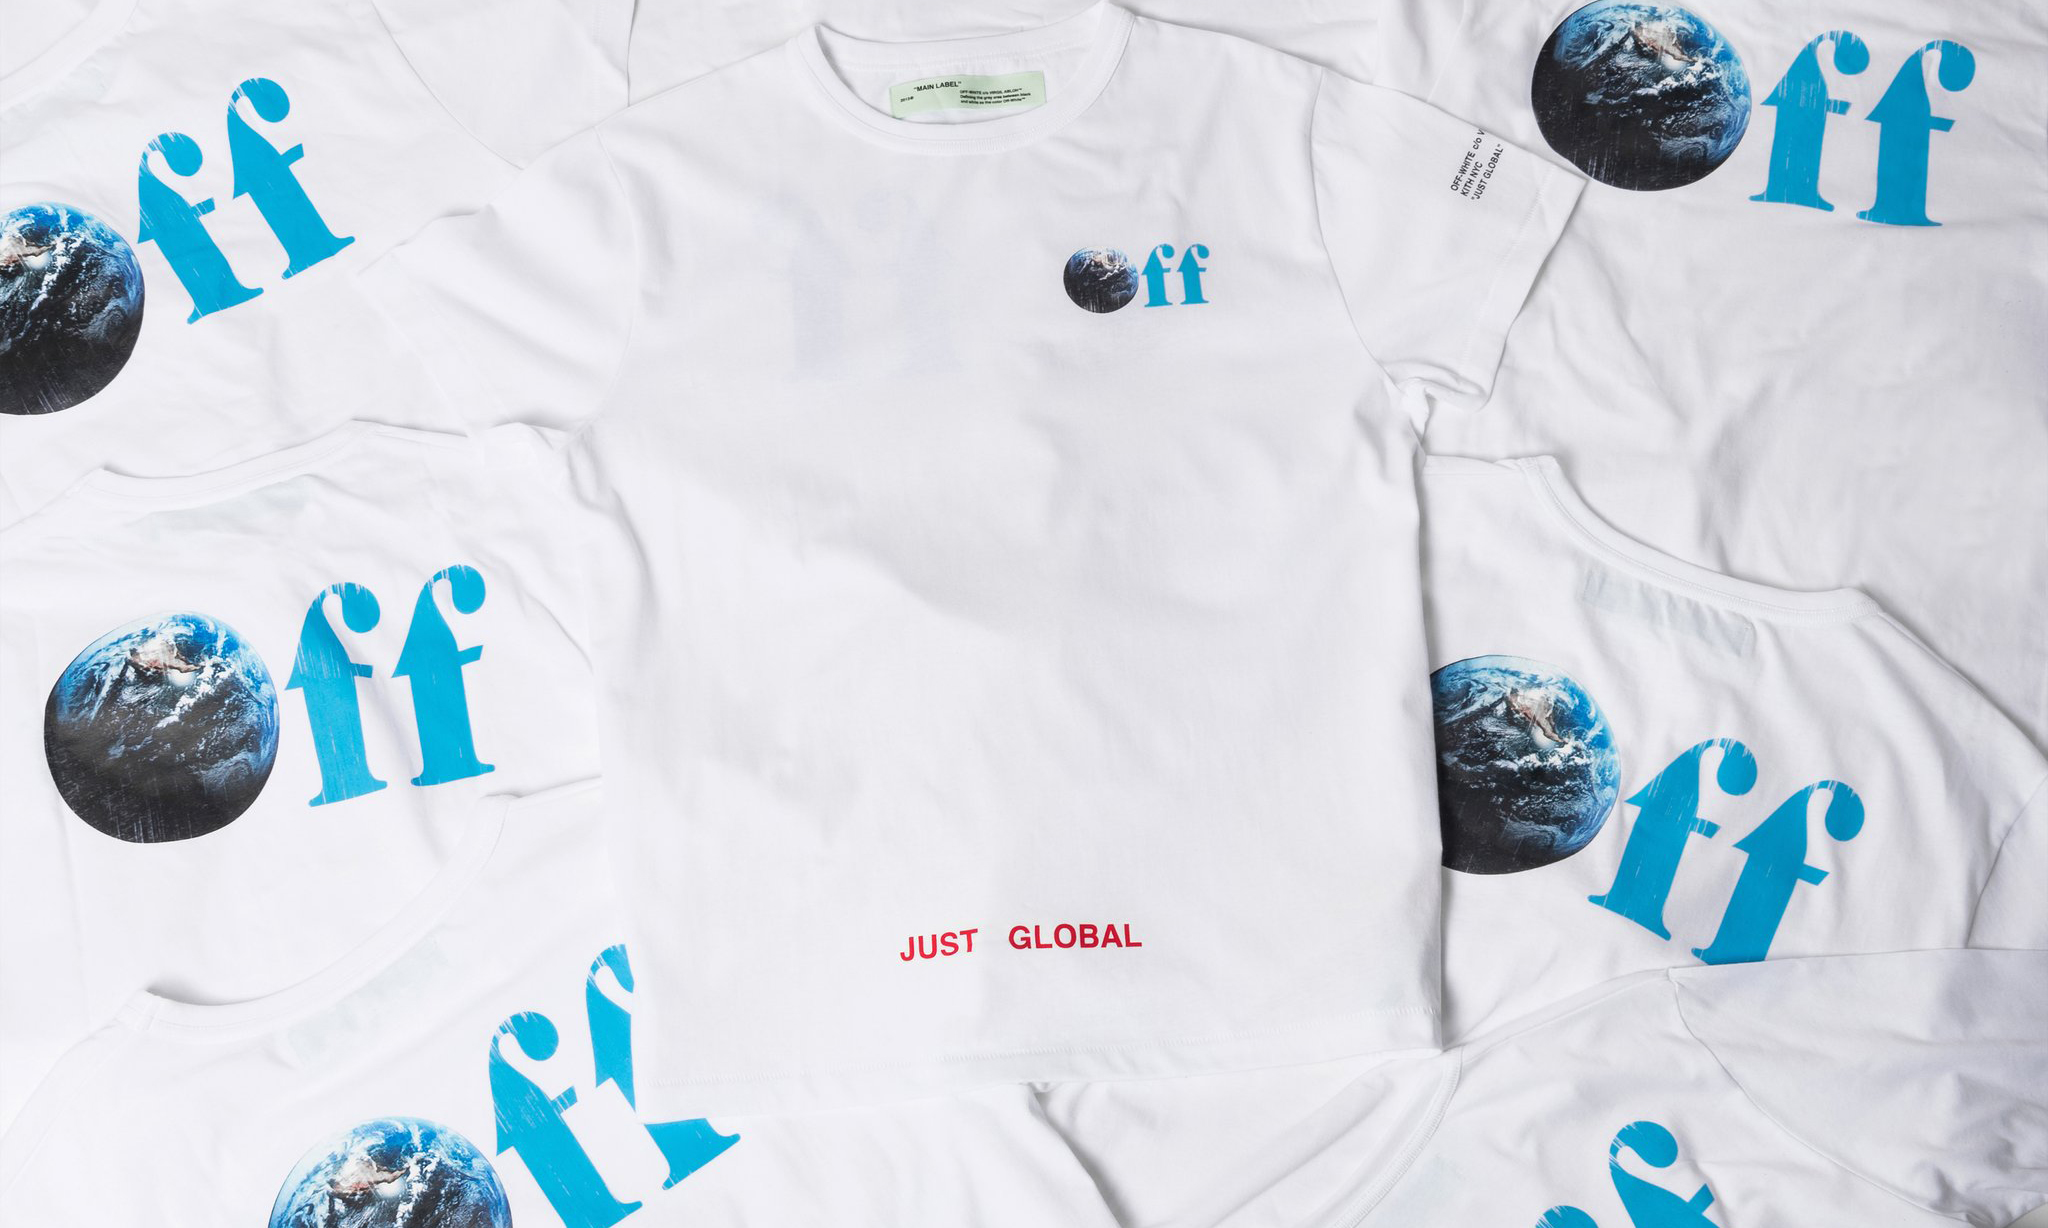 OFF-WHITE x KITH “JUST GLOBAL” 联名系列正式公布